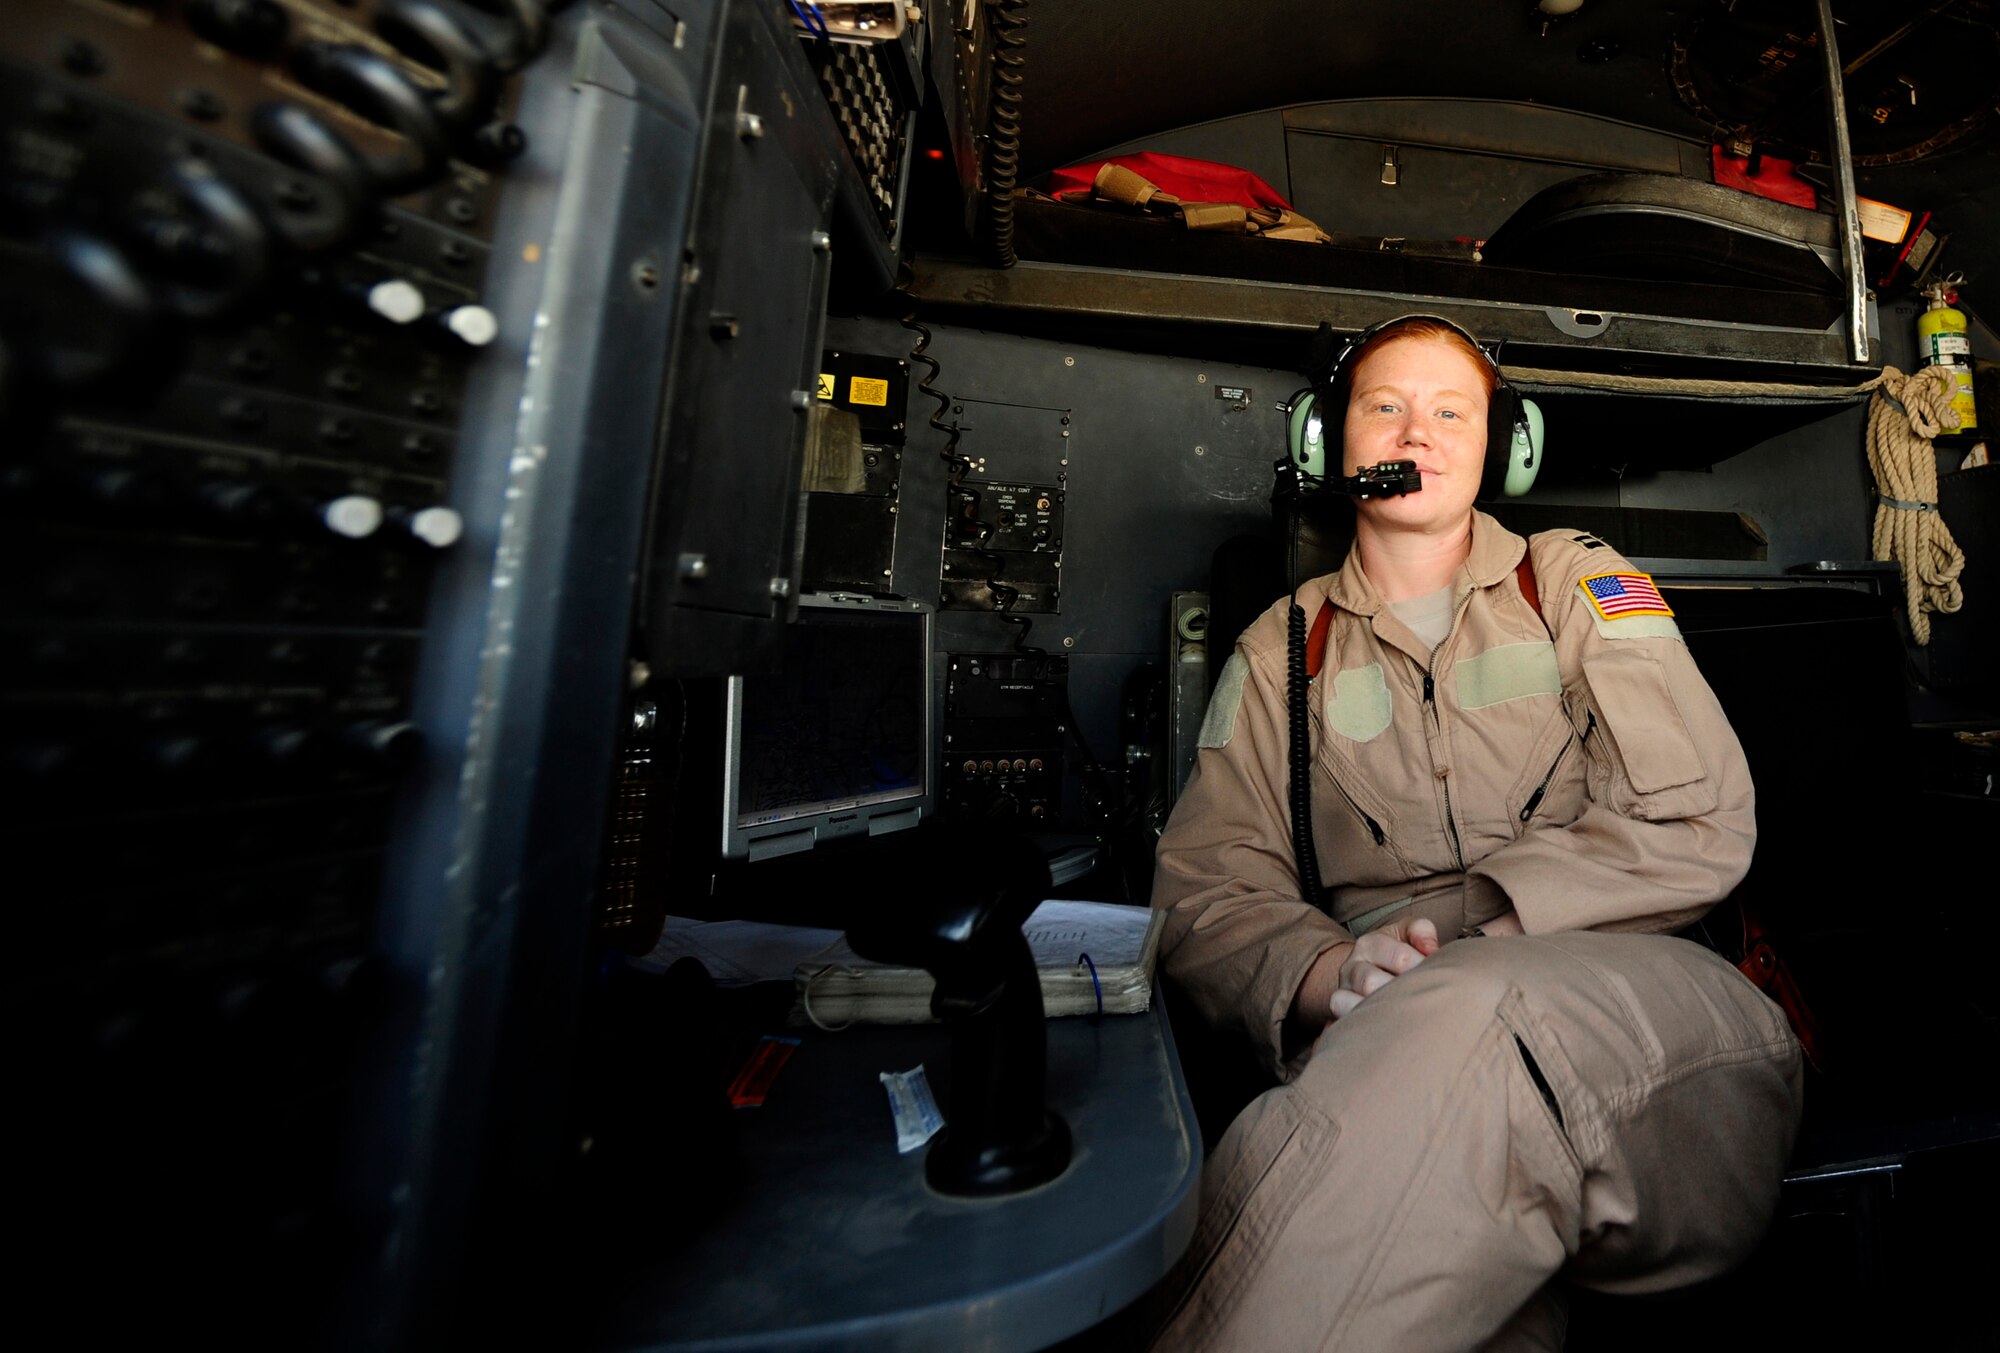 U.S. Air Force Capt. Elizabeth Valasek a C-130 Hercules navigator assigned to the 777th Expeditionary Airlift Squadron, looks out to the horizon during a flying mission over Iraq generating out of Joint Base Balad, Iraq on July 25, 2010. 
(U.S. Air Force photo by Staff Sgt. Andy M. Kin / Released)